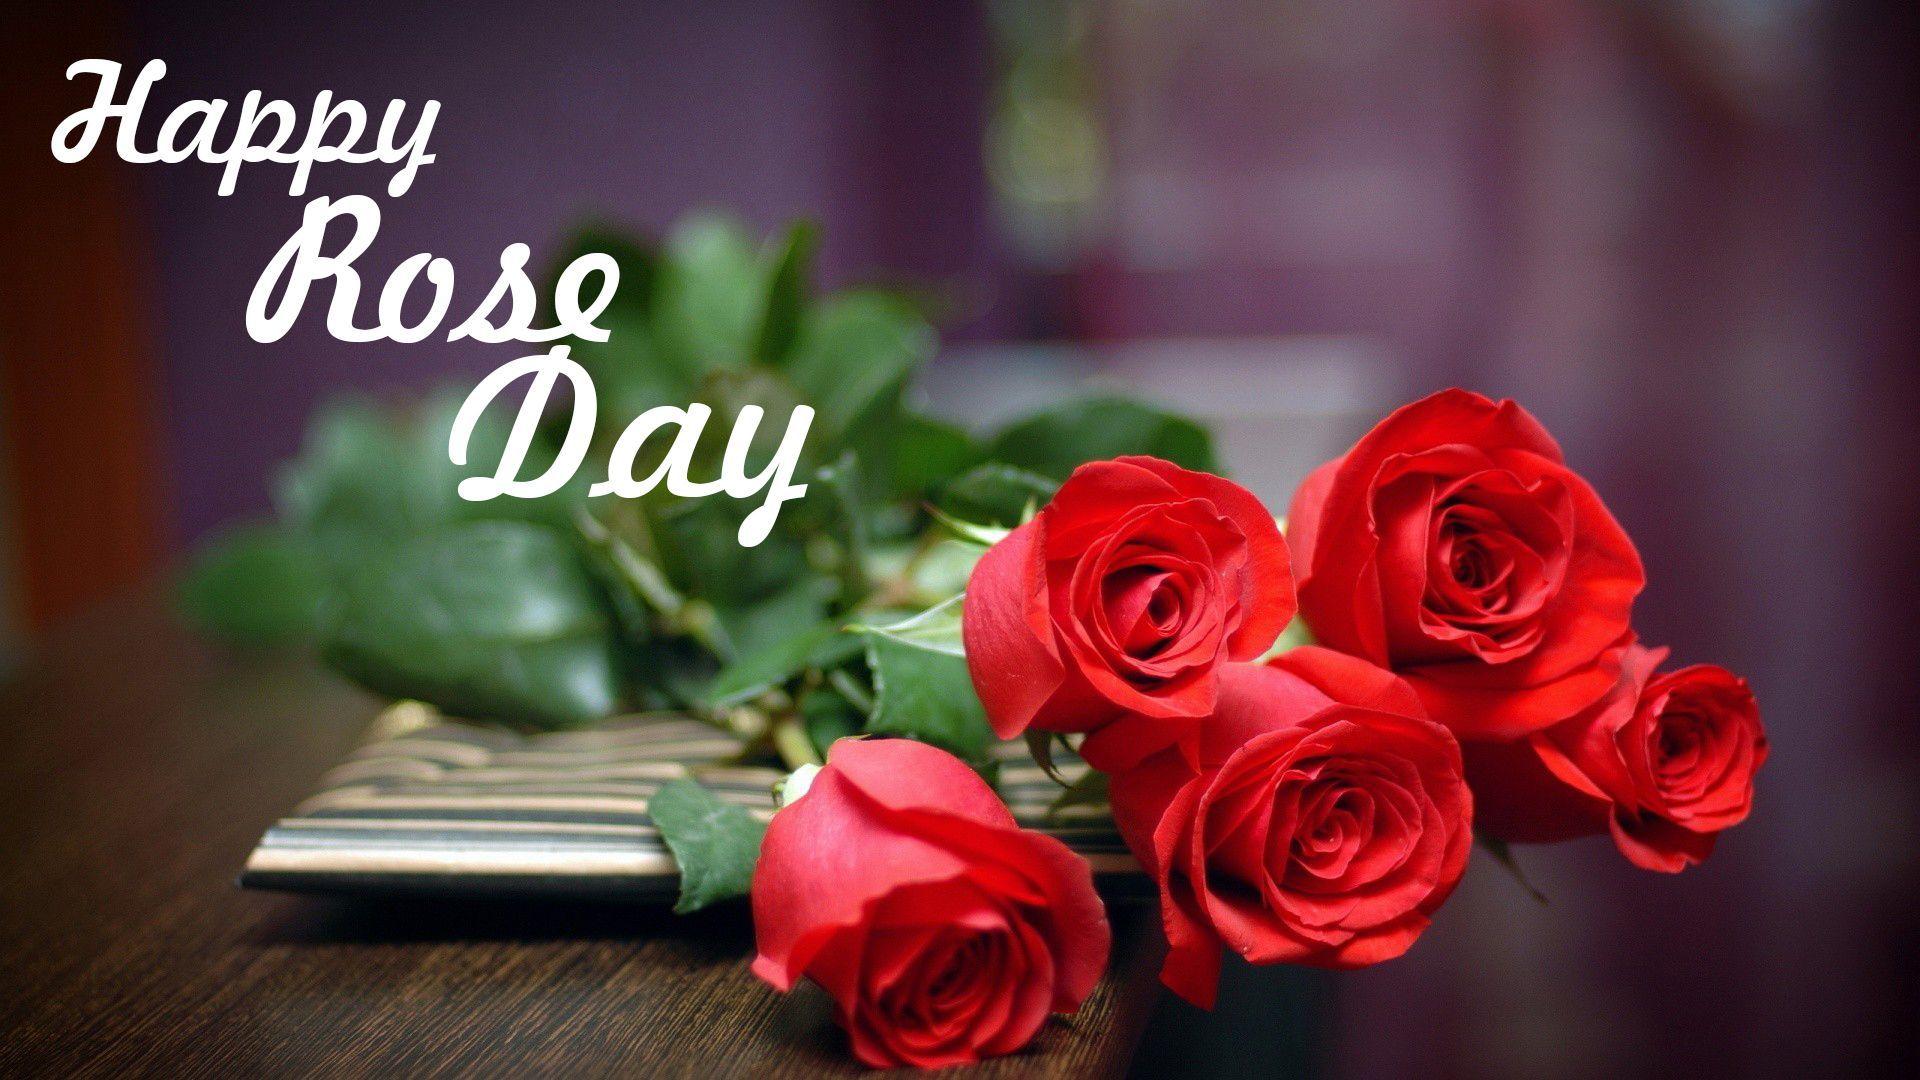 Rose Day Wallpaper and Beautiful Image 2017